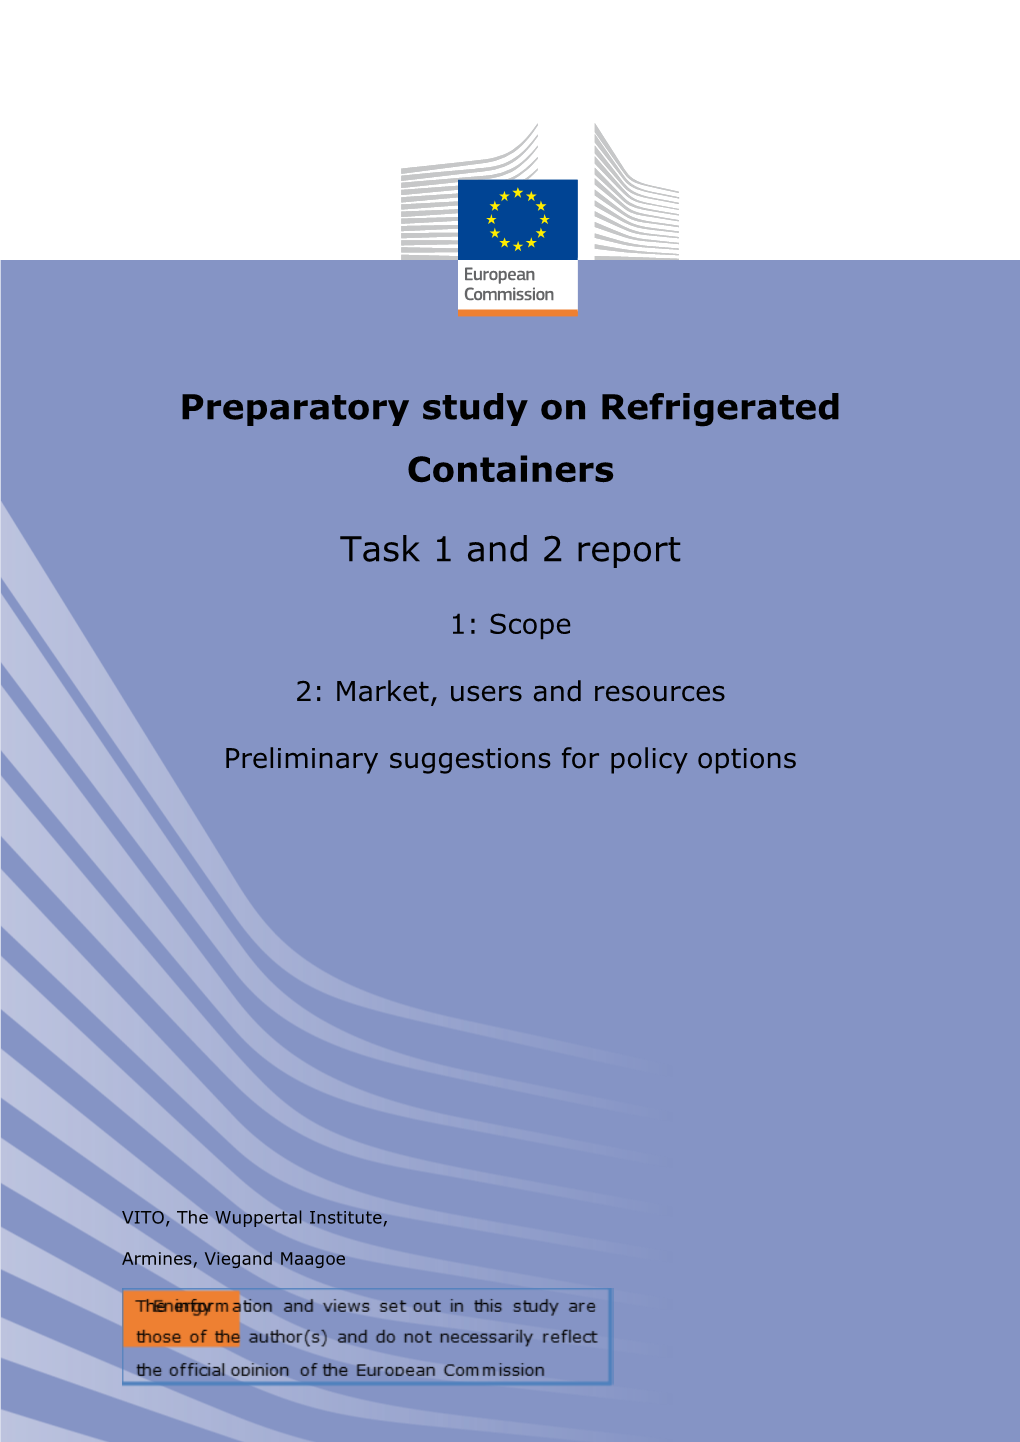 Preparatory Study on Refrigerated Containers Task 1 and 2 Report